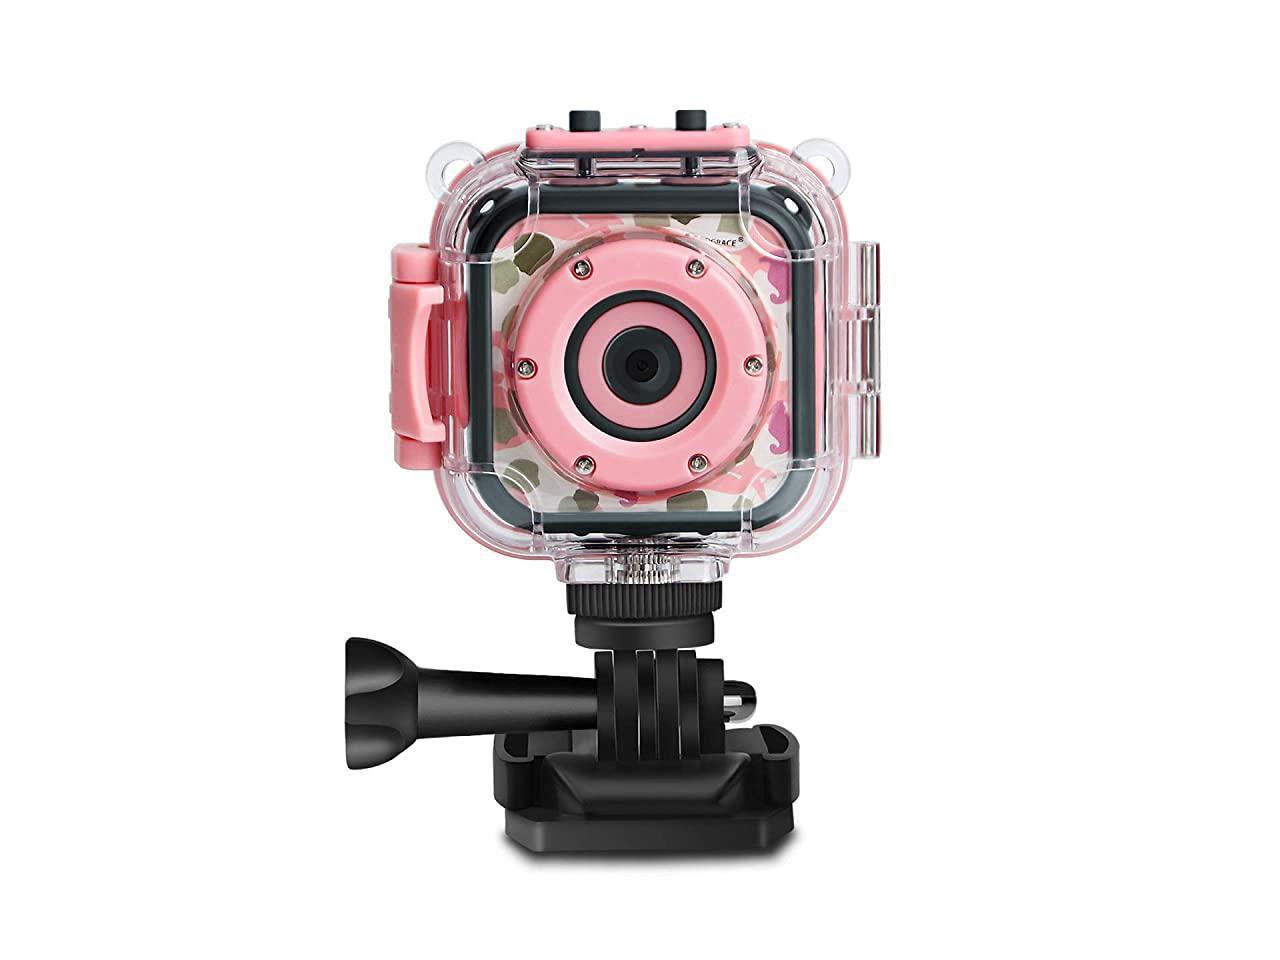 TURN RAISE Kids Digital Camera,Mini Gifts Shockproof Childrens Camcorders 1080P HD Supported 10M Diving Waterproof Video Camera with Silicone Soft Cover for Outdoor Play,Pink 